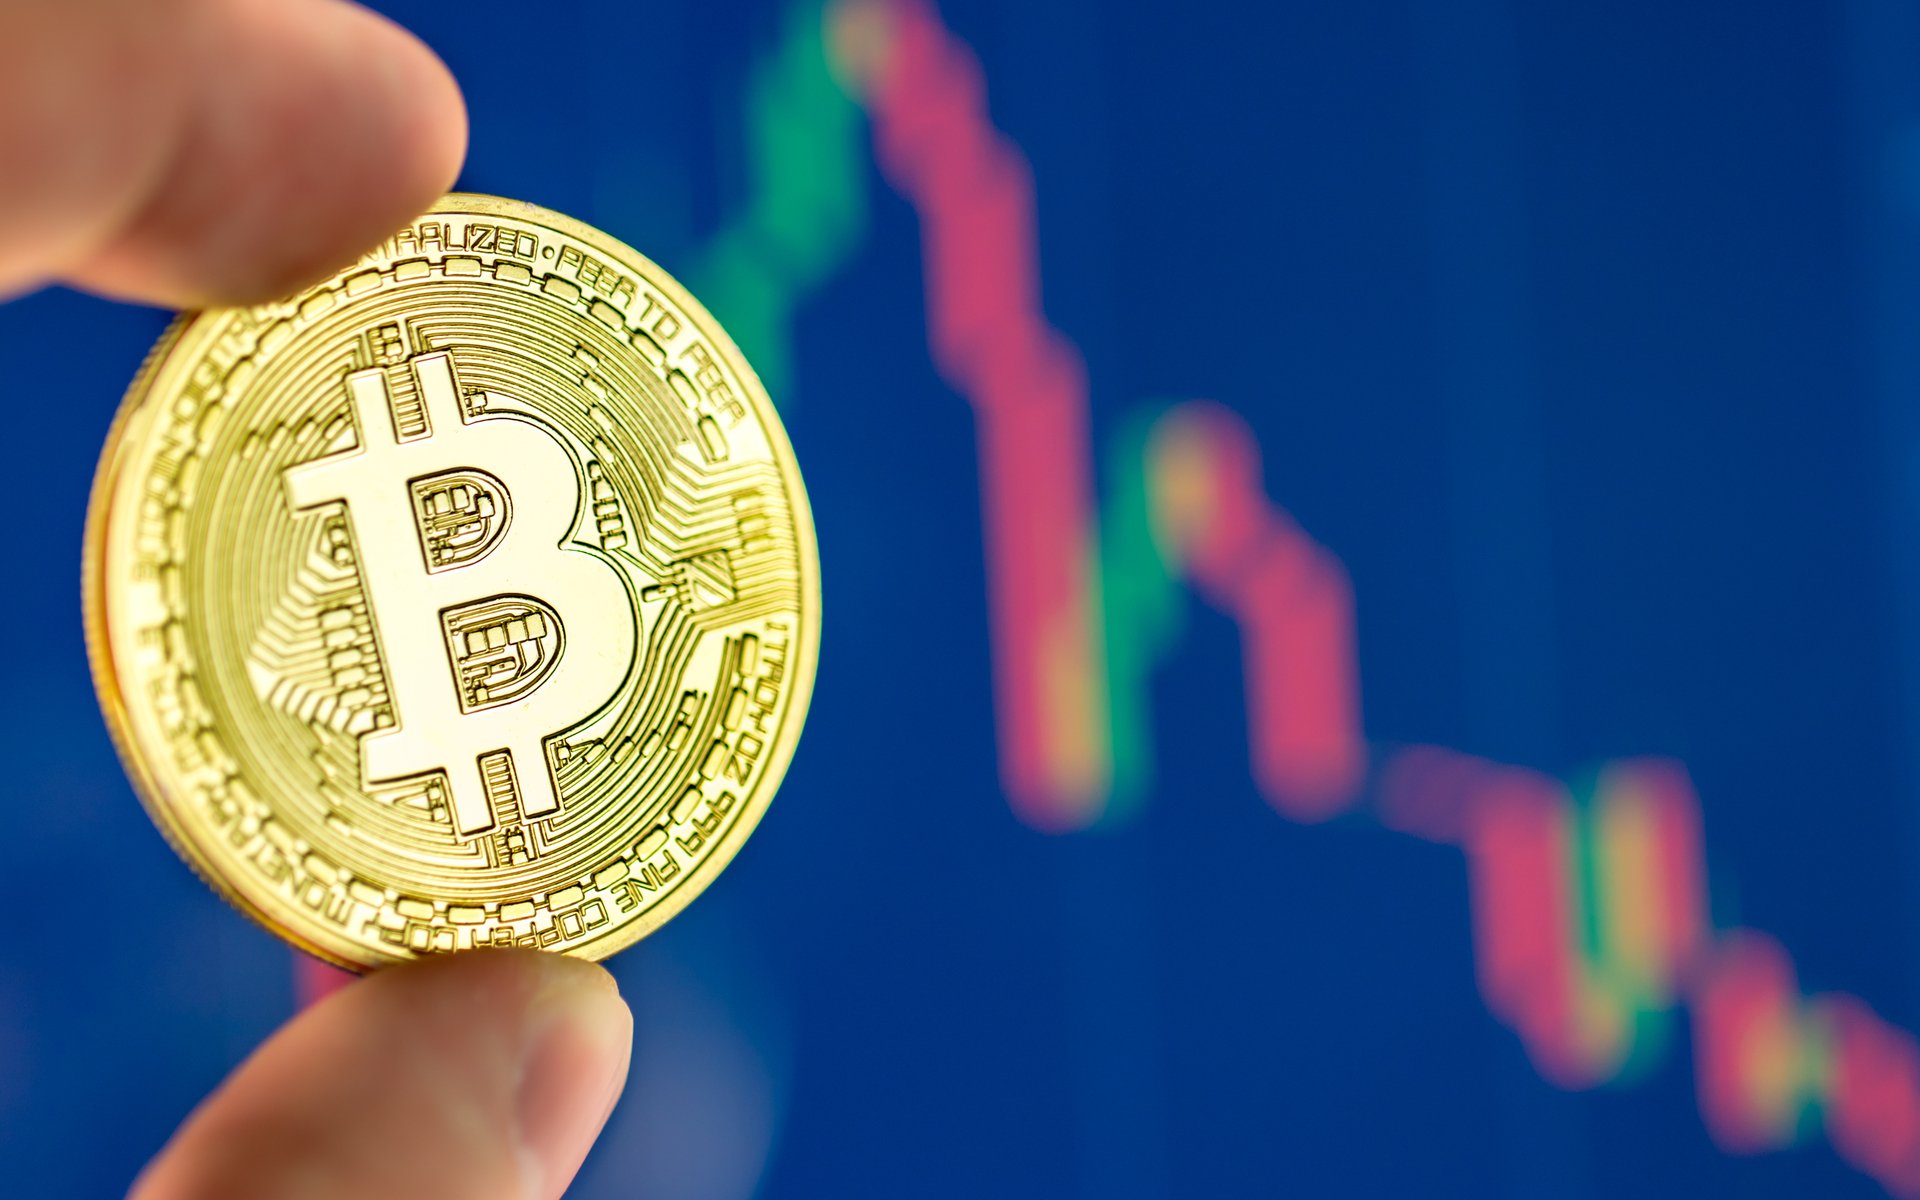 Bitcoin Price May Hit $7800 This Week But Eyes Are On ‘Real’ $4900 Floor